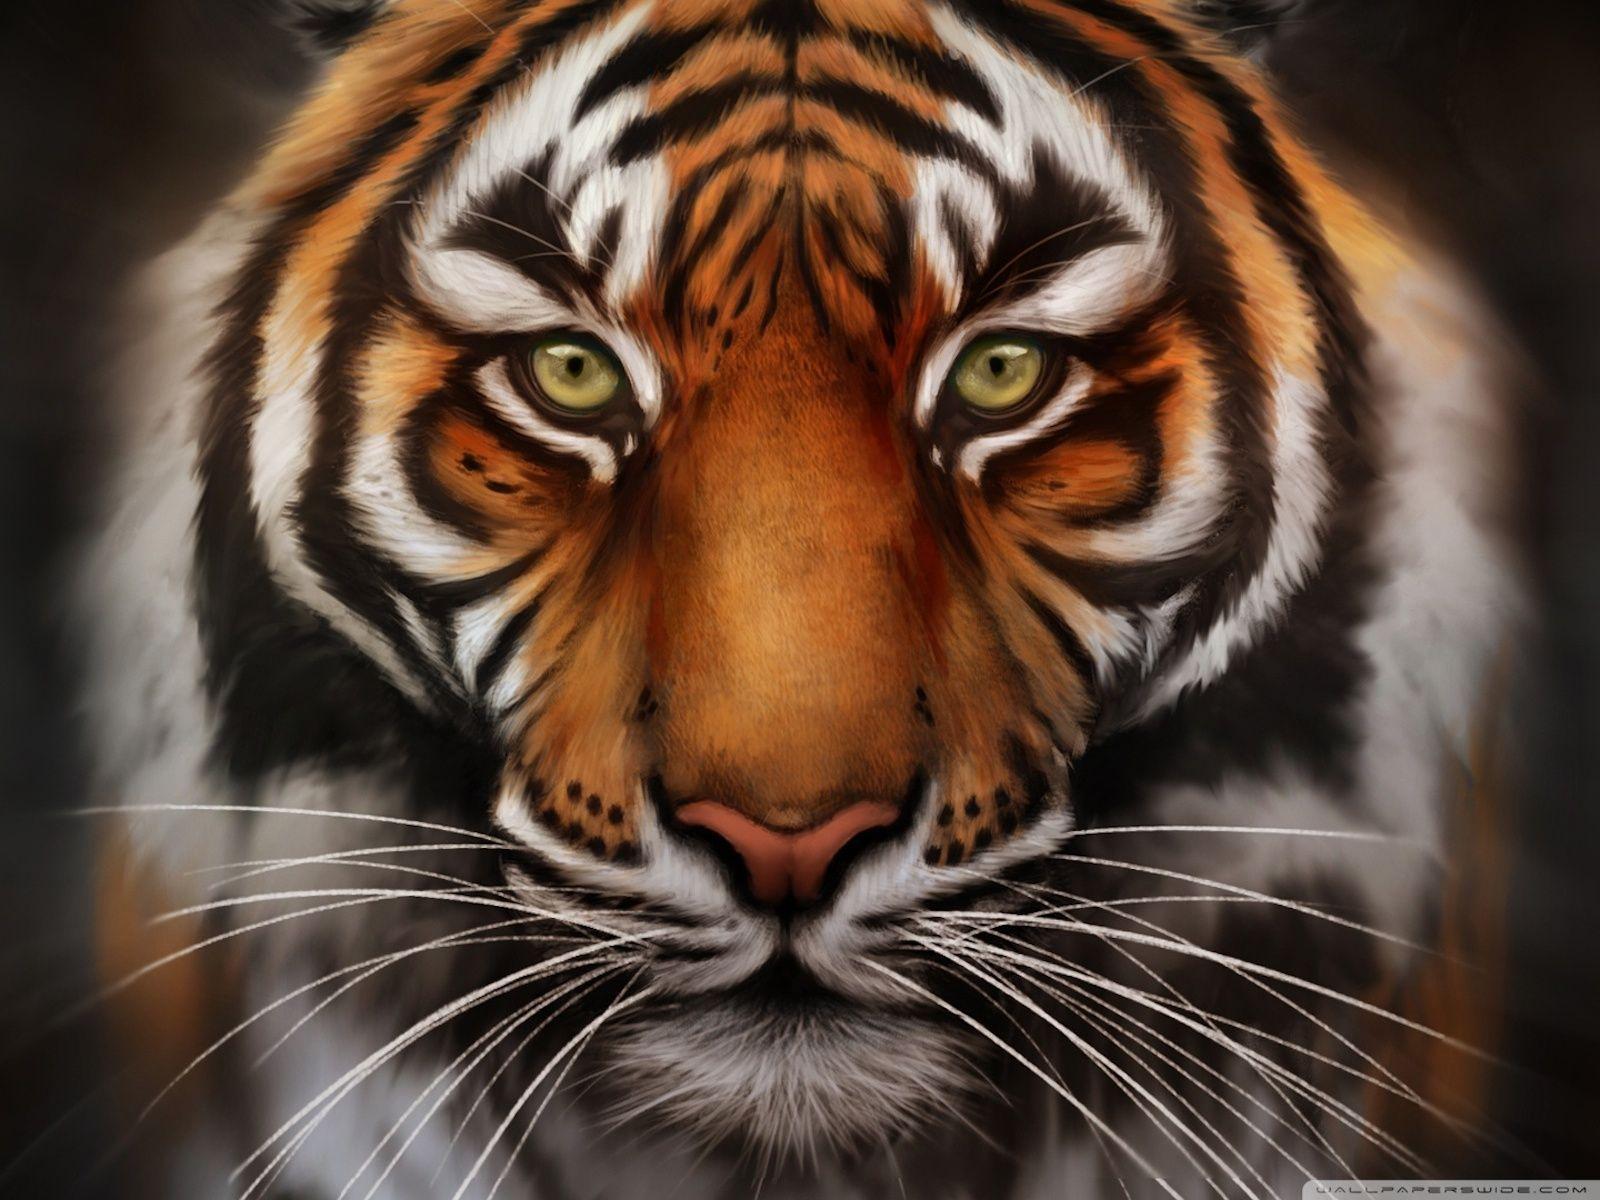 Tiger Face Wallpaper HD Image Amp Pictures Becuo